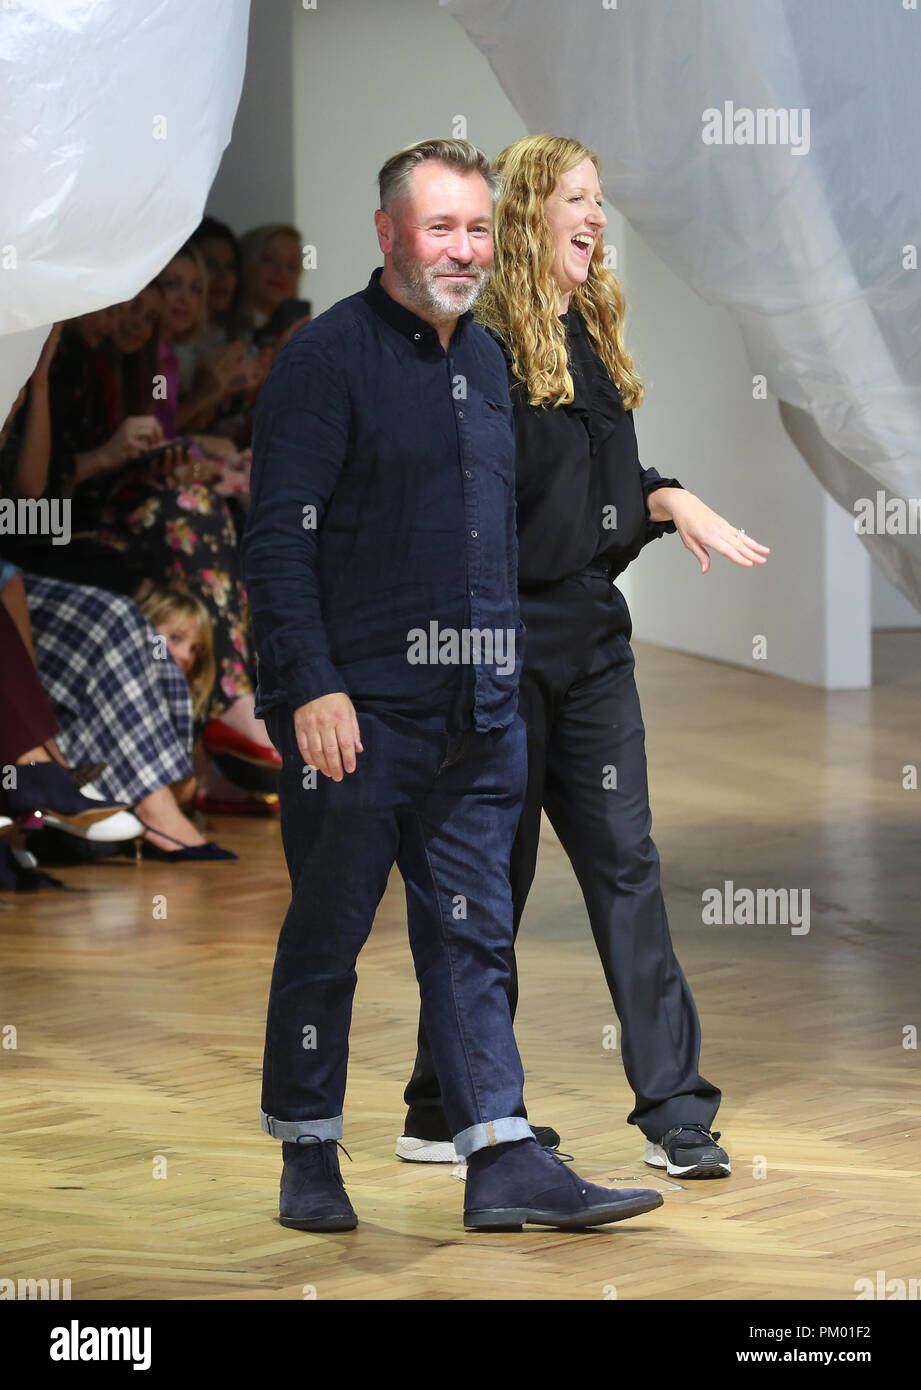 Designers Justin Thornton and Thea Bregazzi acknowledge the audience after their catwalk during the Preen by Thornton Bregazzi London Fashion Week September 2018 show at Lindley Hall, London Stock Photo